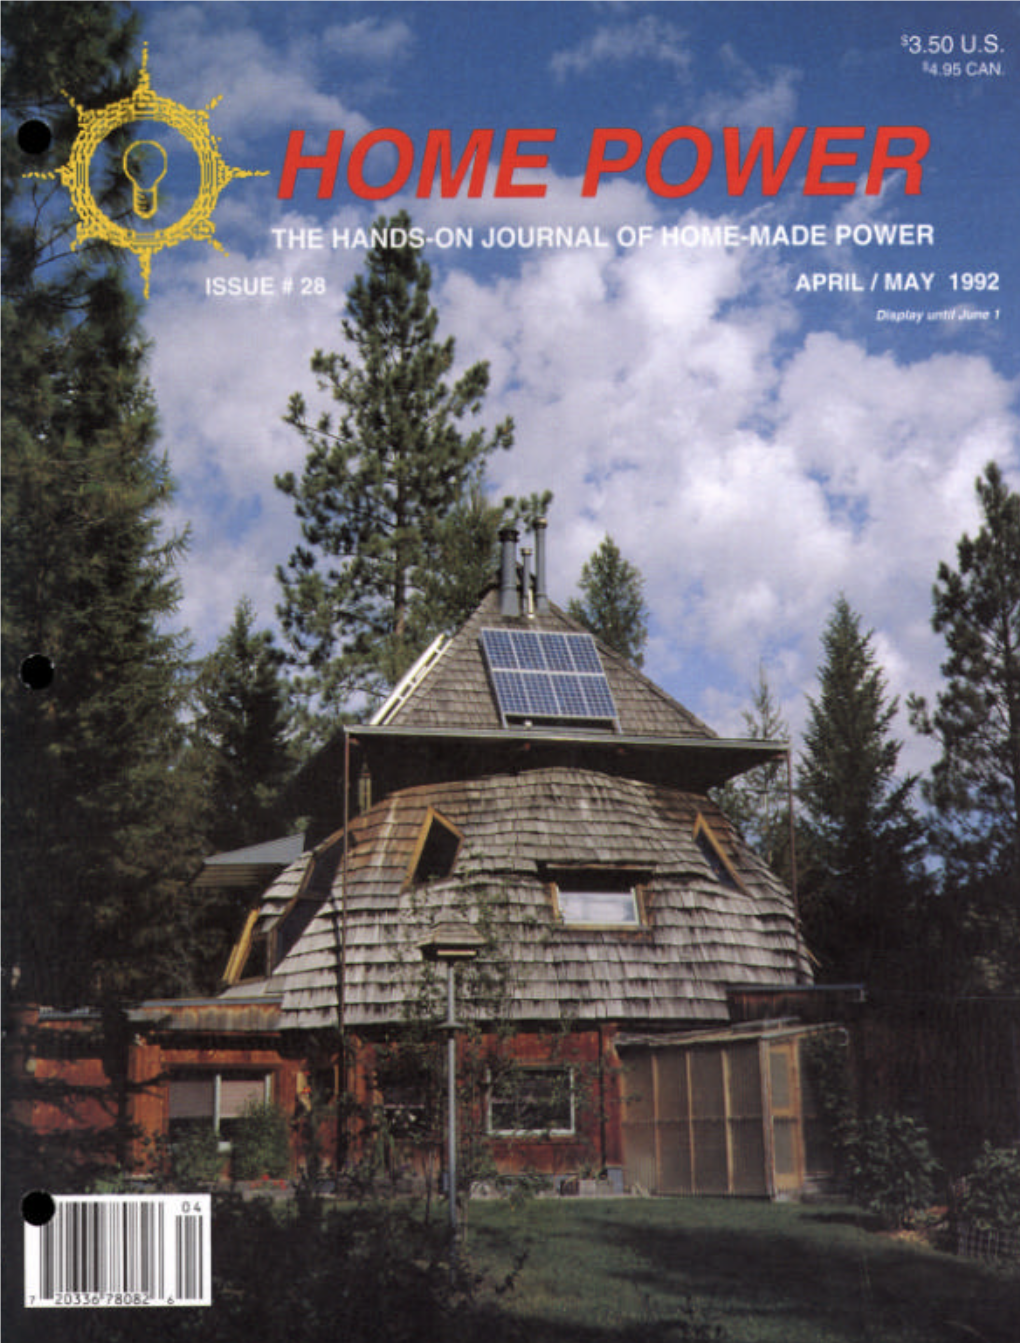 Home Power #28 ¥ April / May 1992 HOME POWER